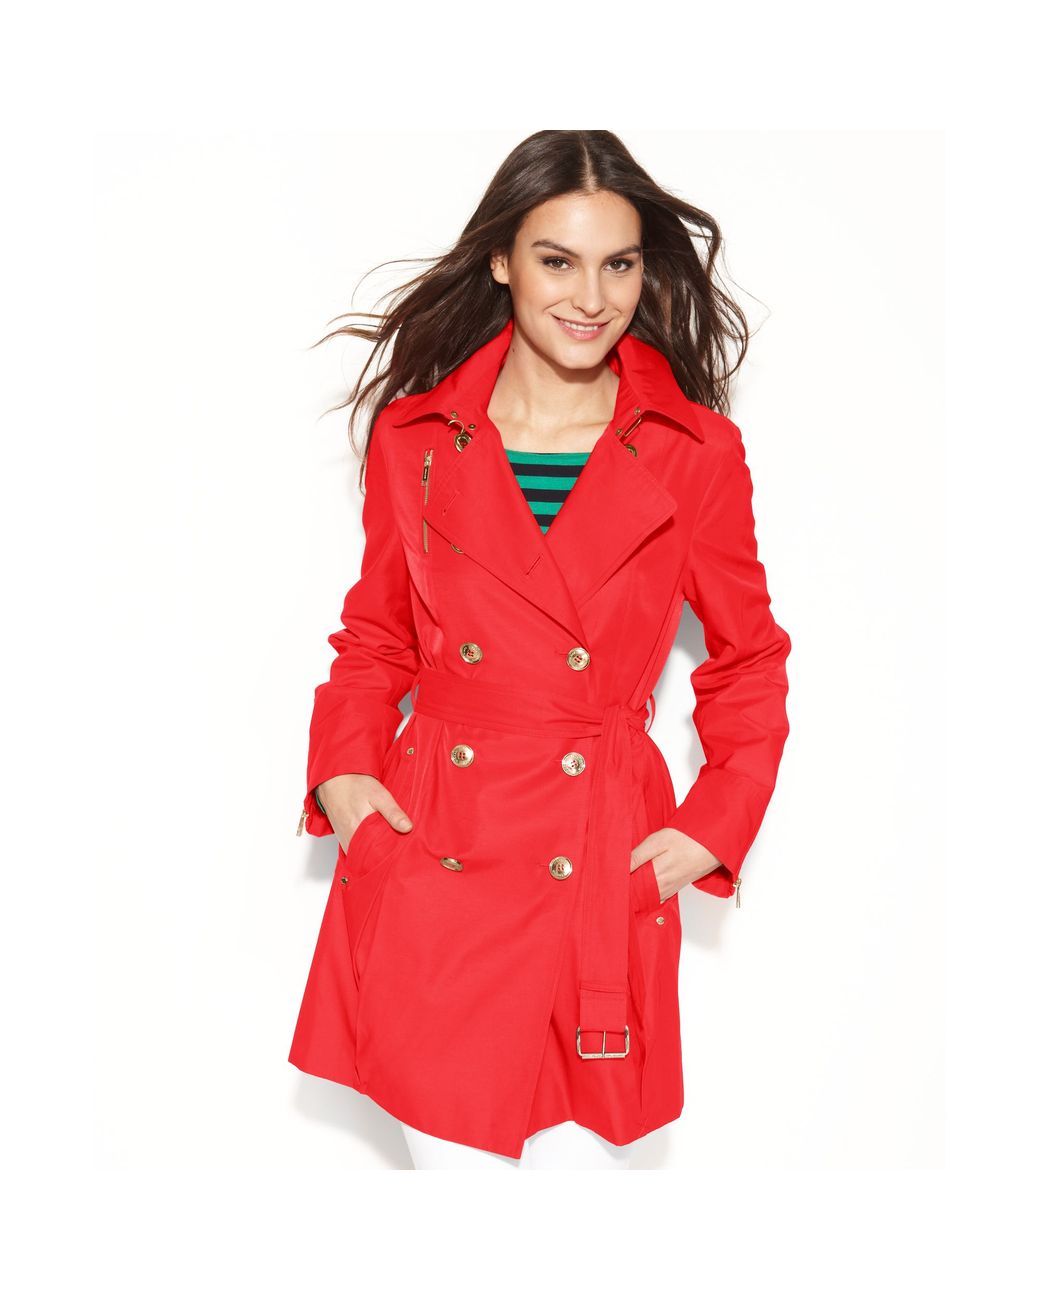 Obsessed with this bright coral red Michael Kors trench coat